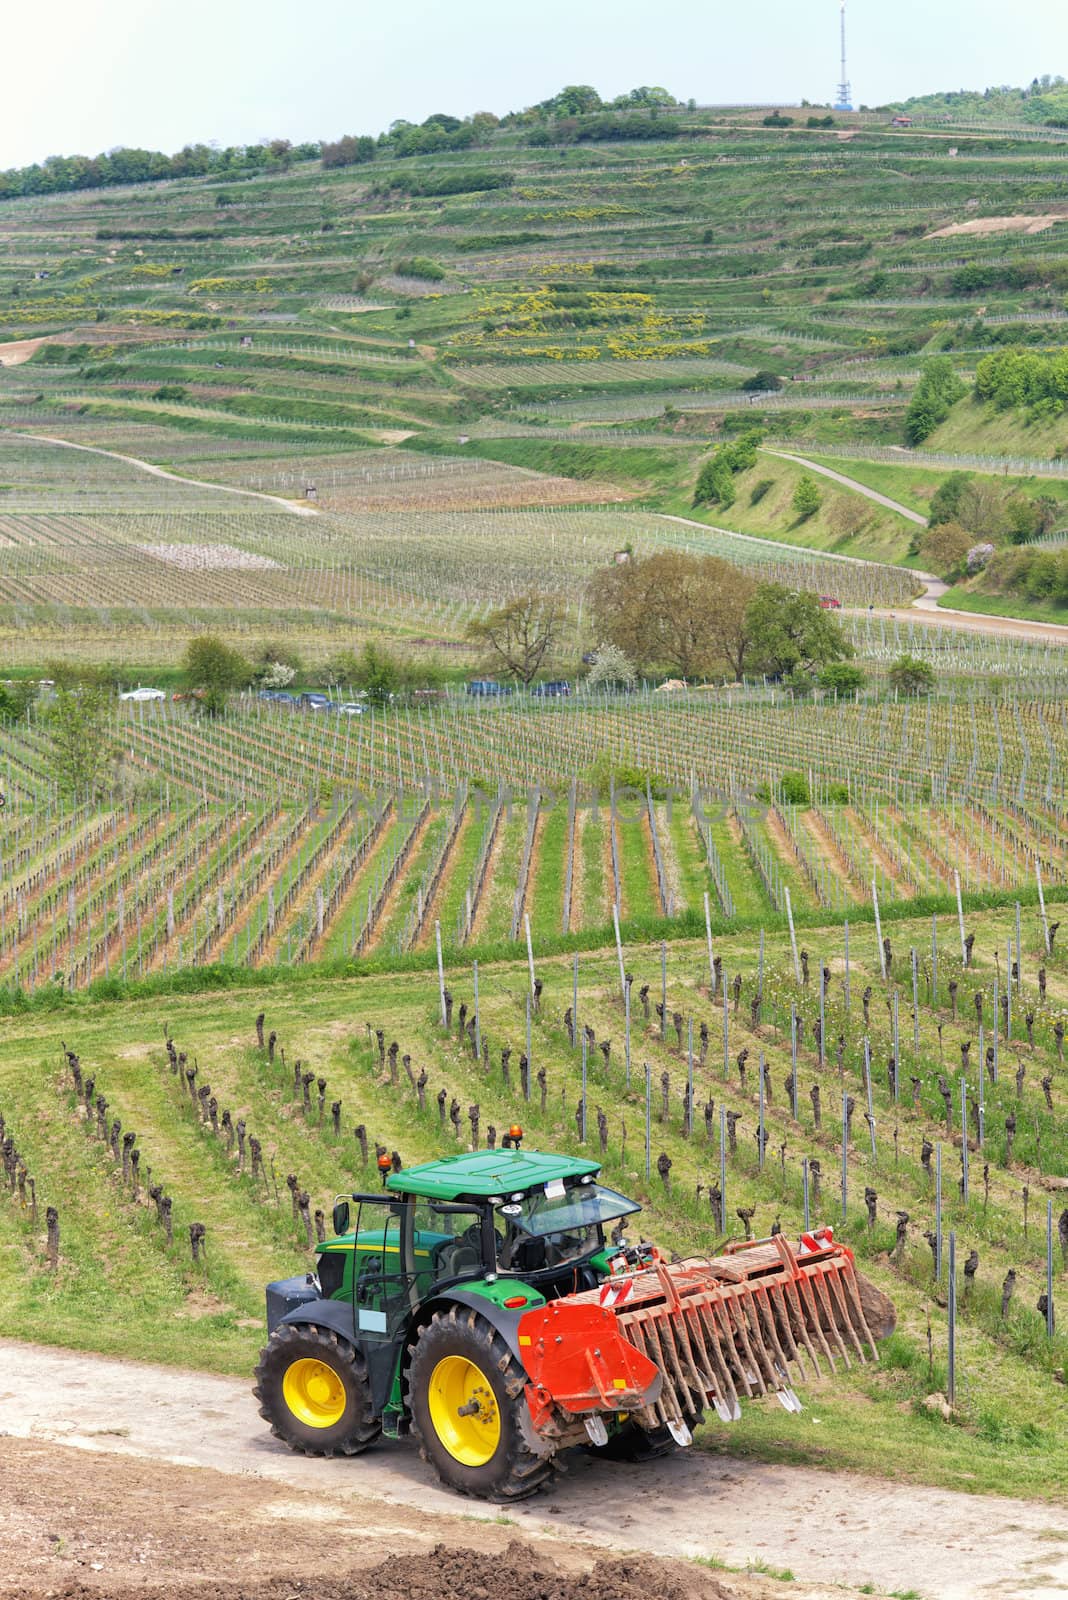 Farm tractor on the ground among growing vineyards